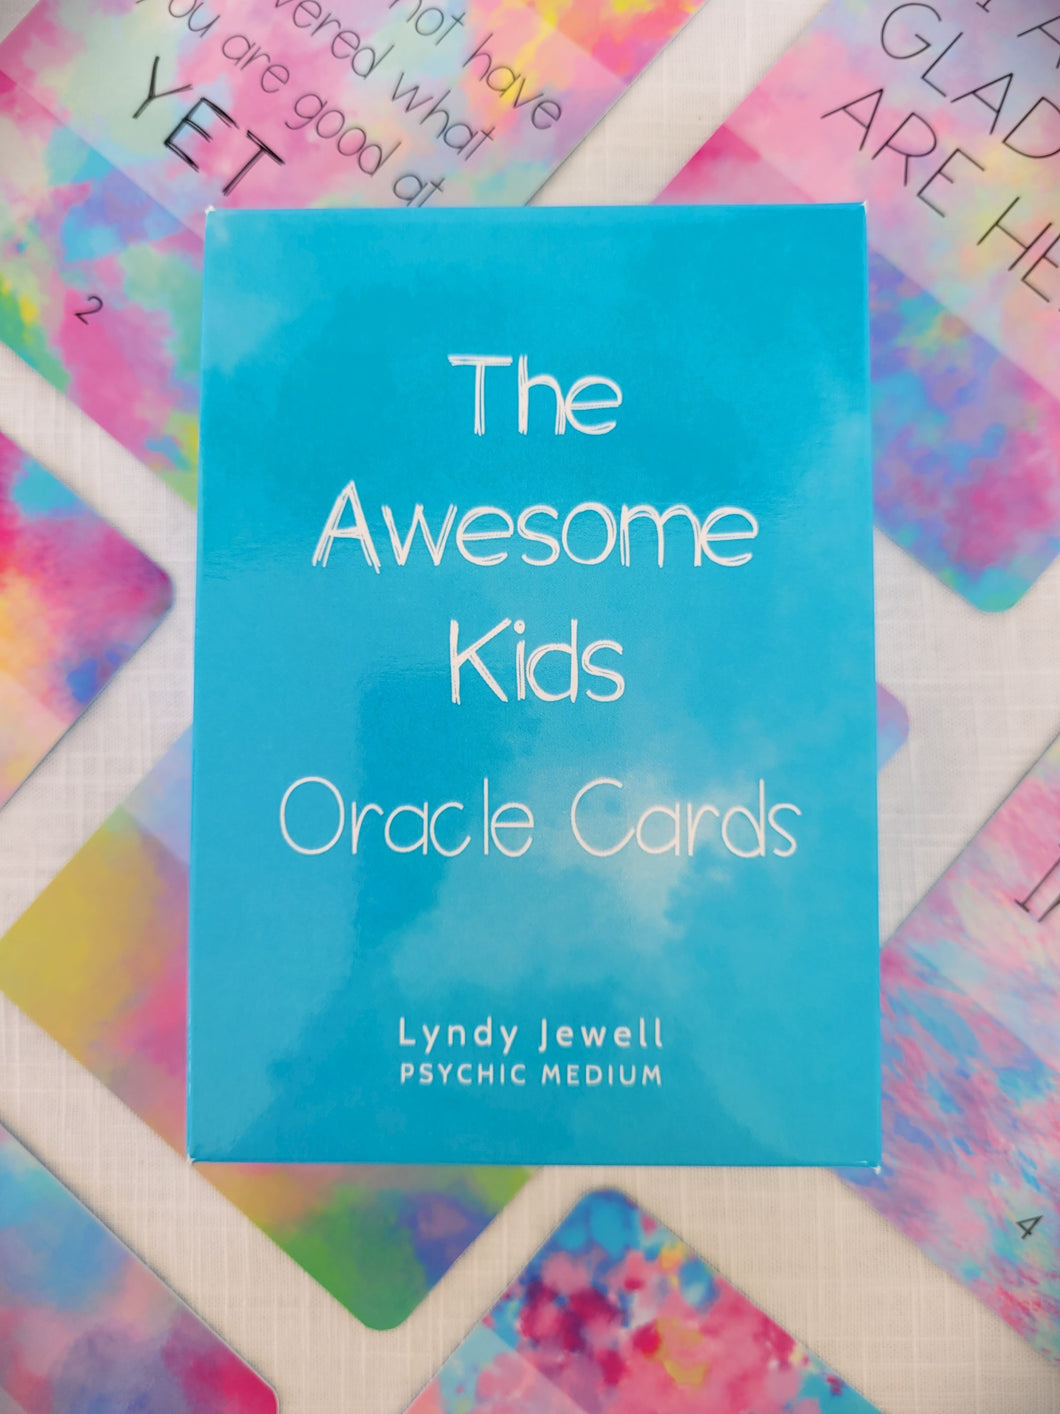 The Awesome Kids Oracle Cards